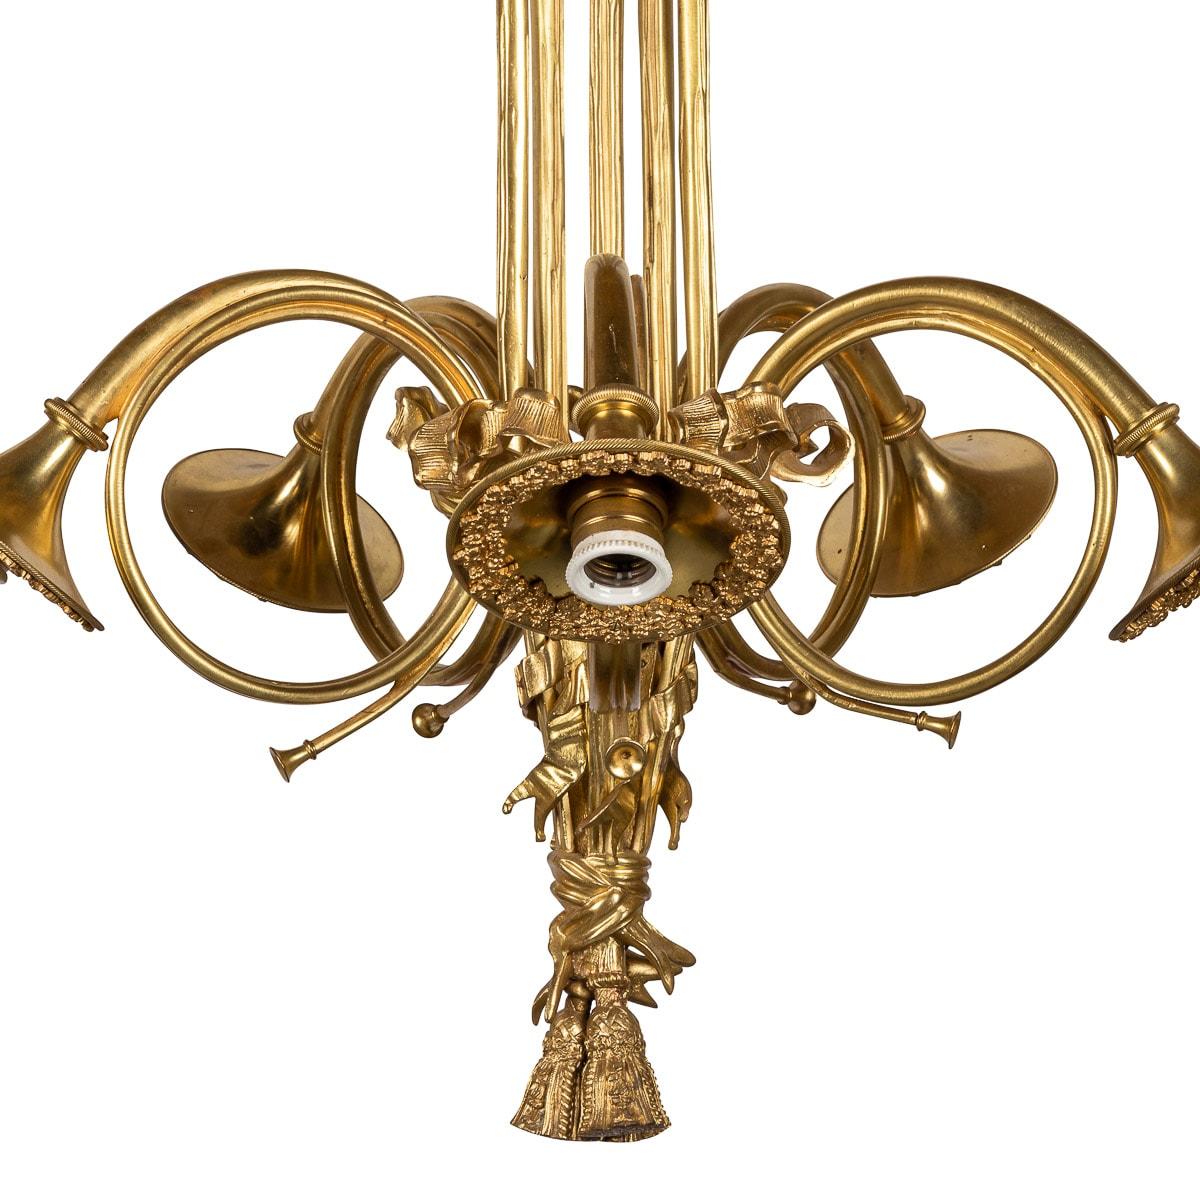 19th Century French Empire Ormolu Chandelier With Trumpet Light Fittings, c.1870 For Sale 4